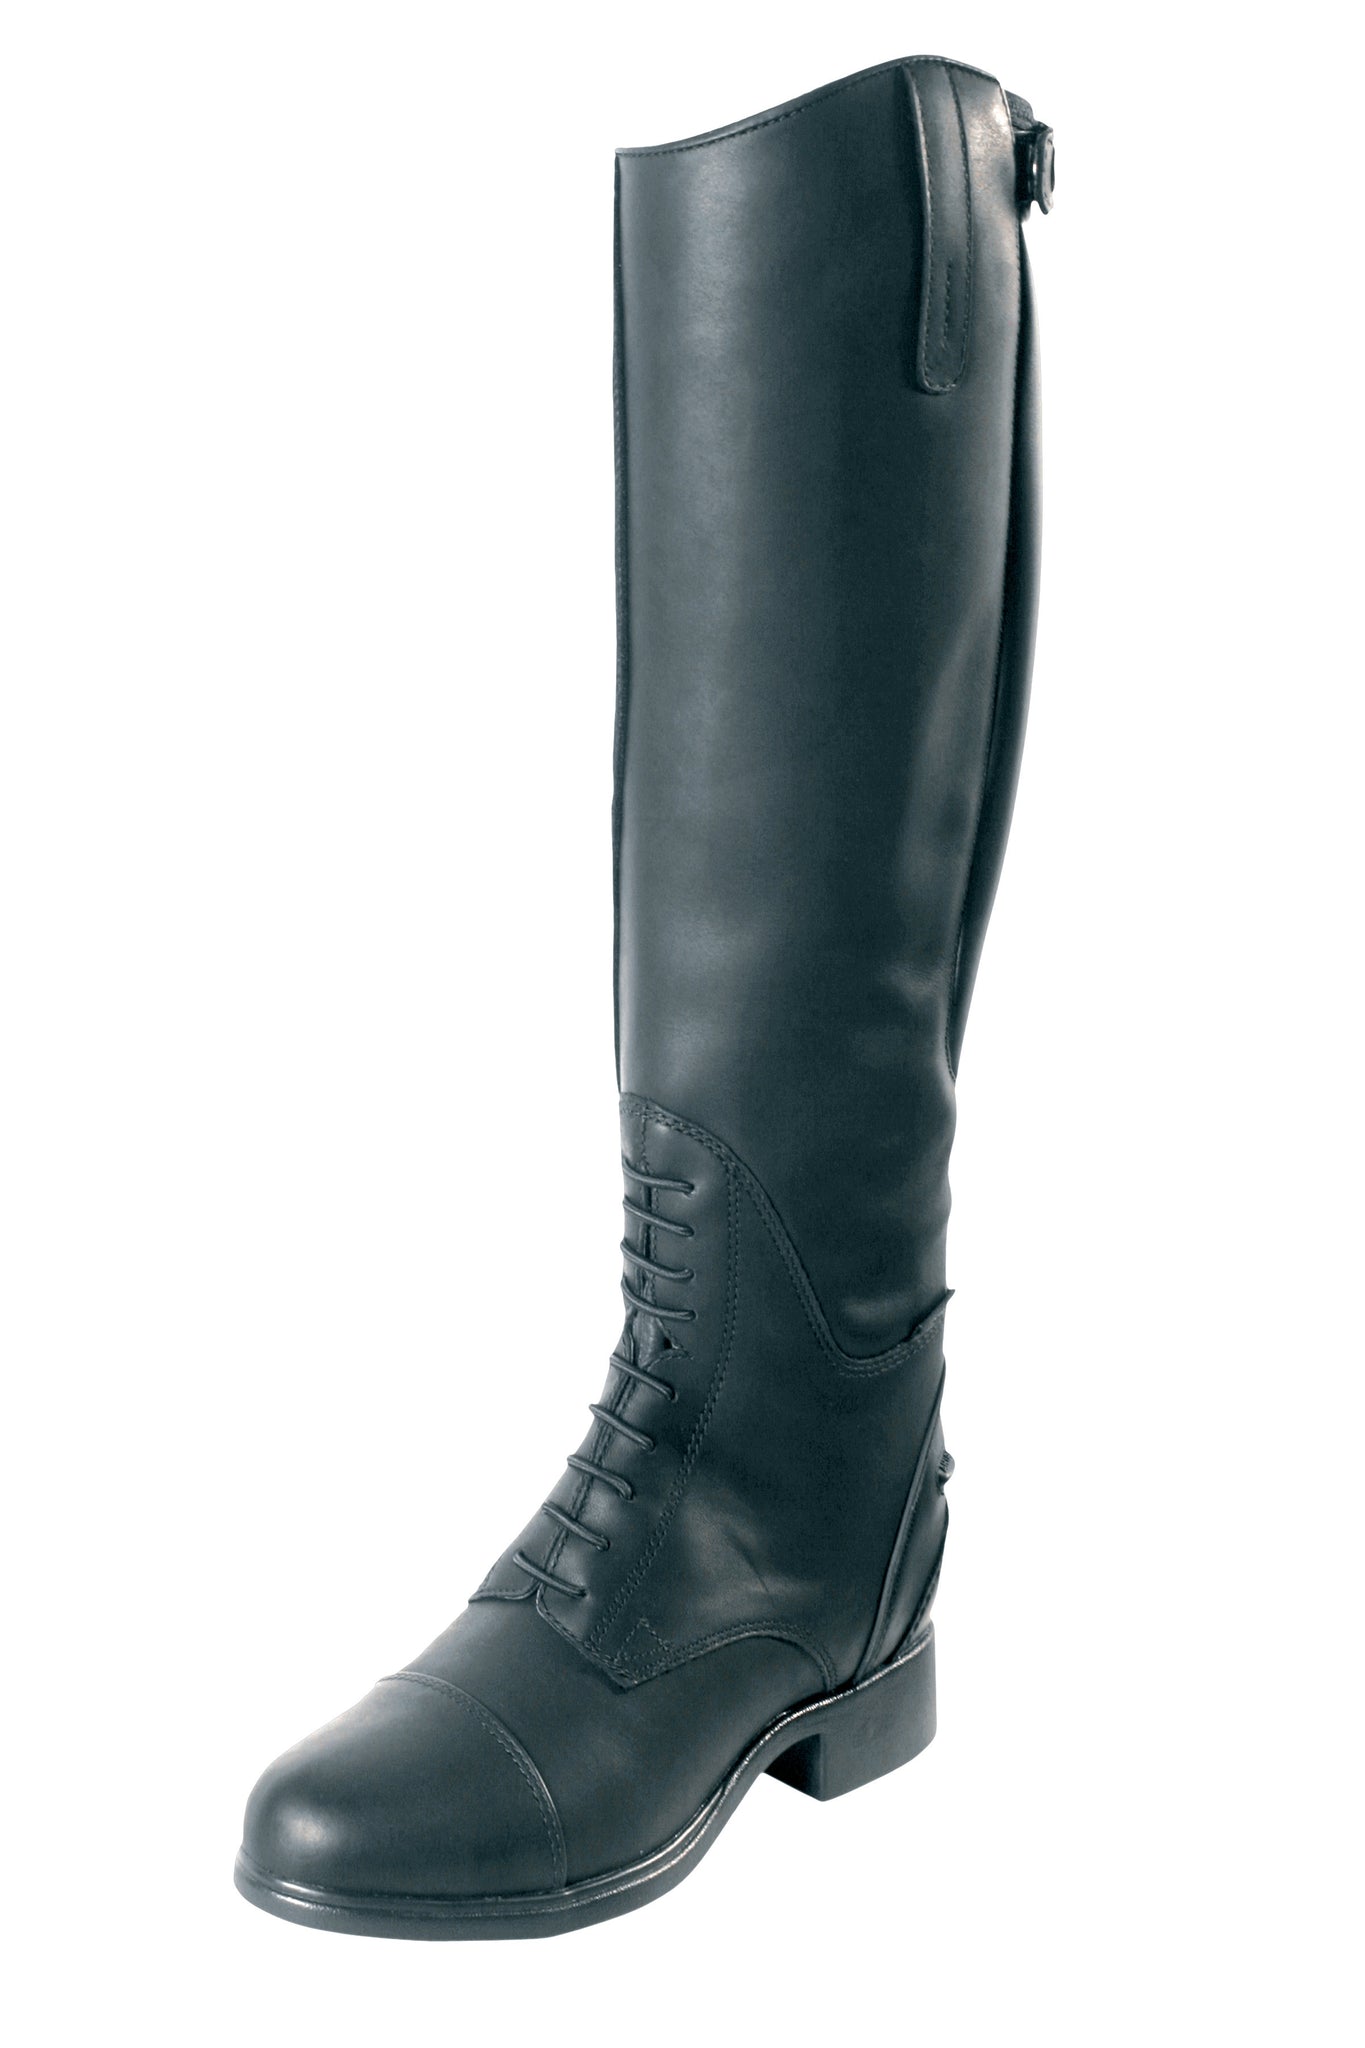 Ariat Women's Bromont Tall Boot H2O – Drovers Saddlery